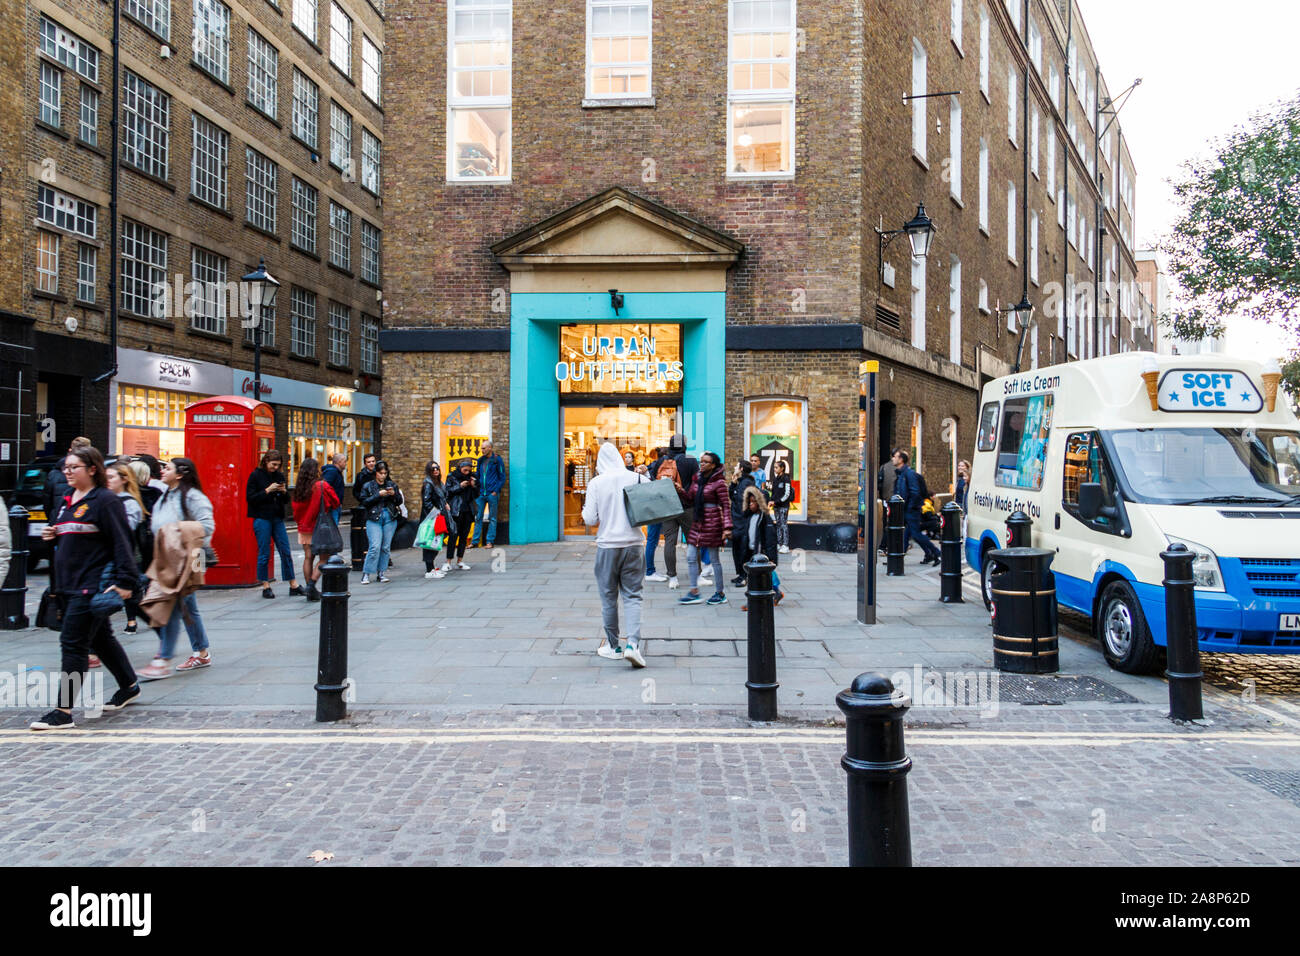 Shoppers and tourists in Neal Street, Covent Garden, London, UK Stock Photo